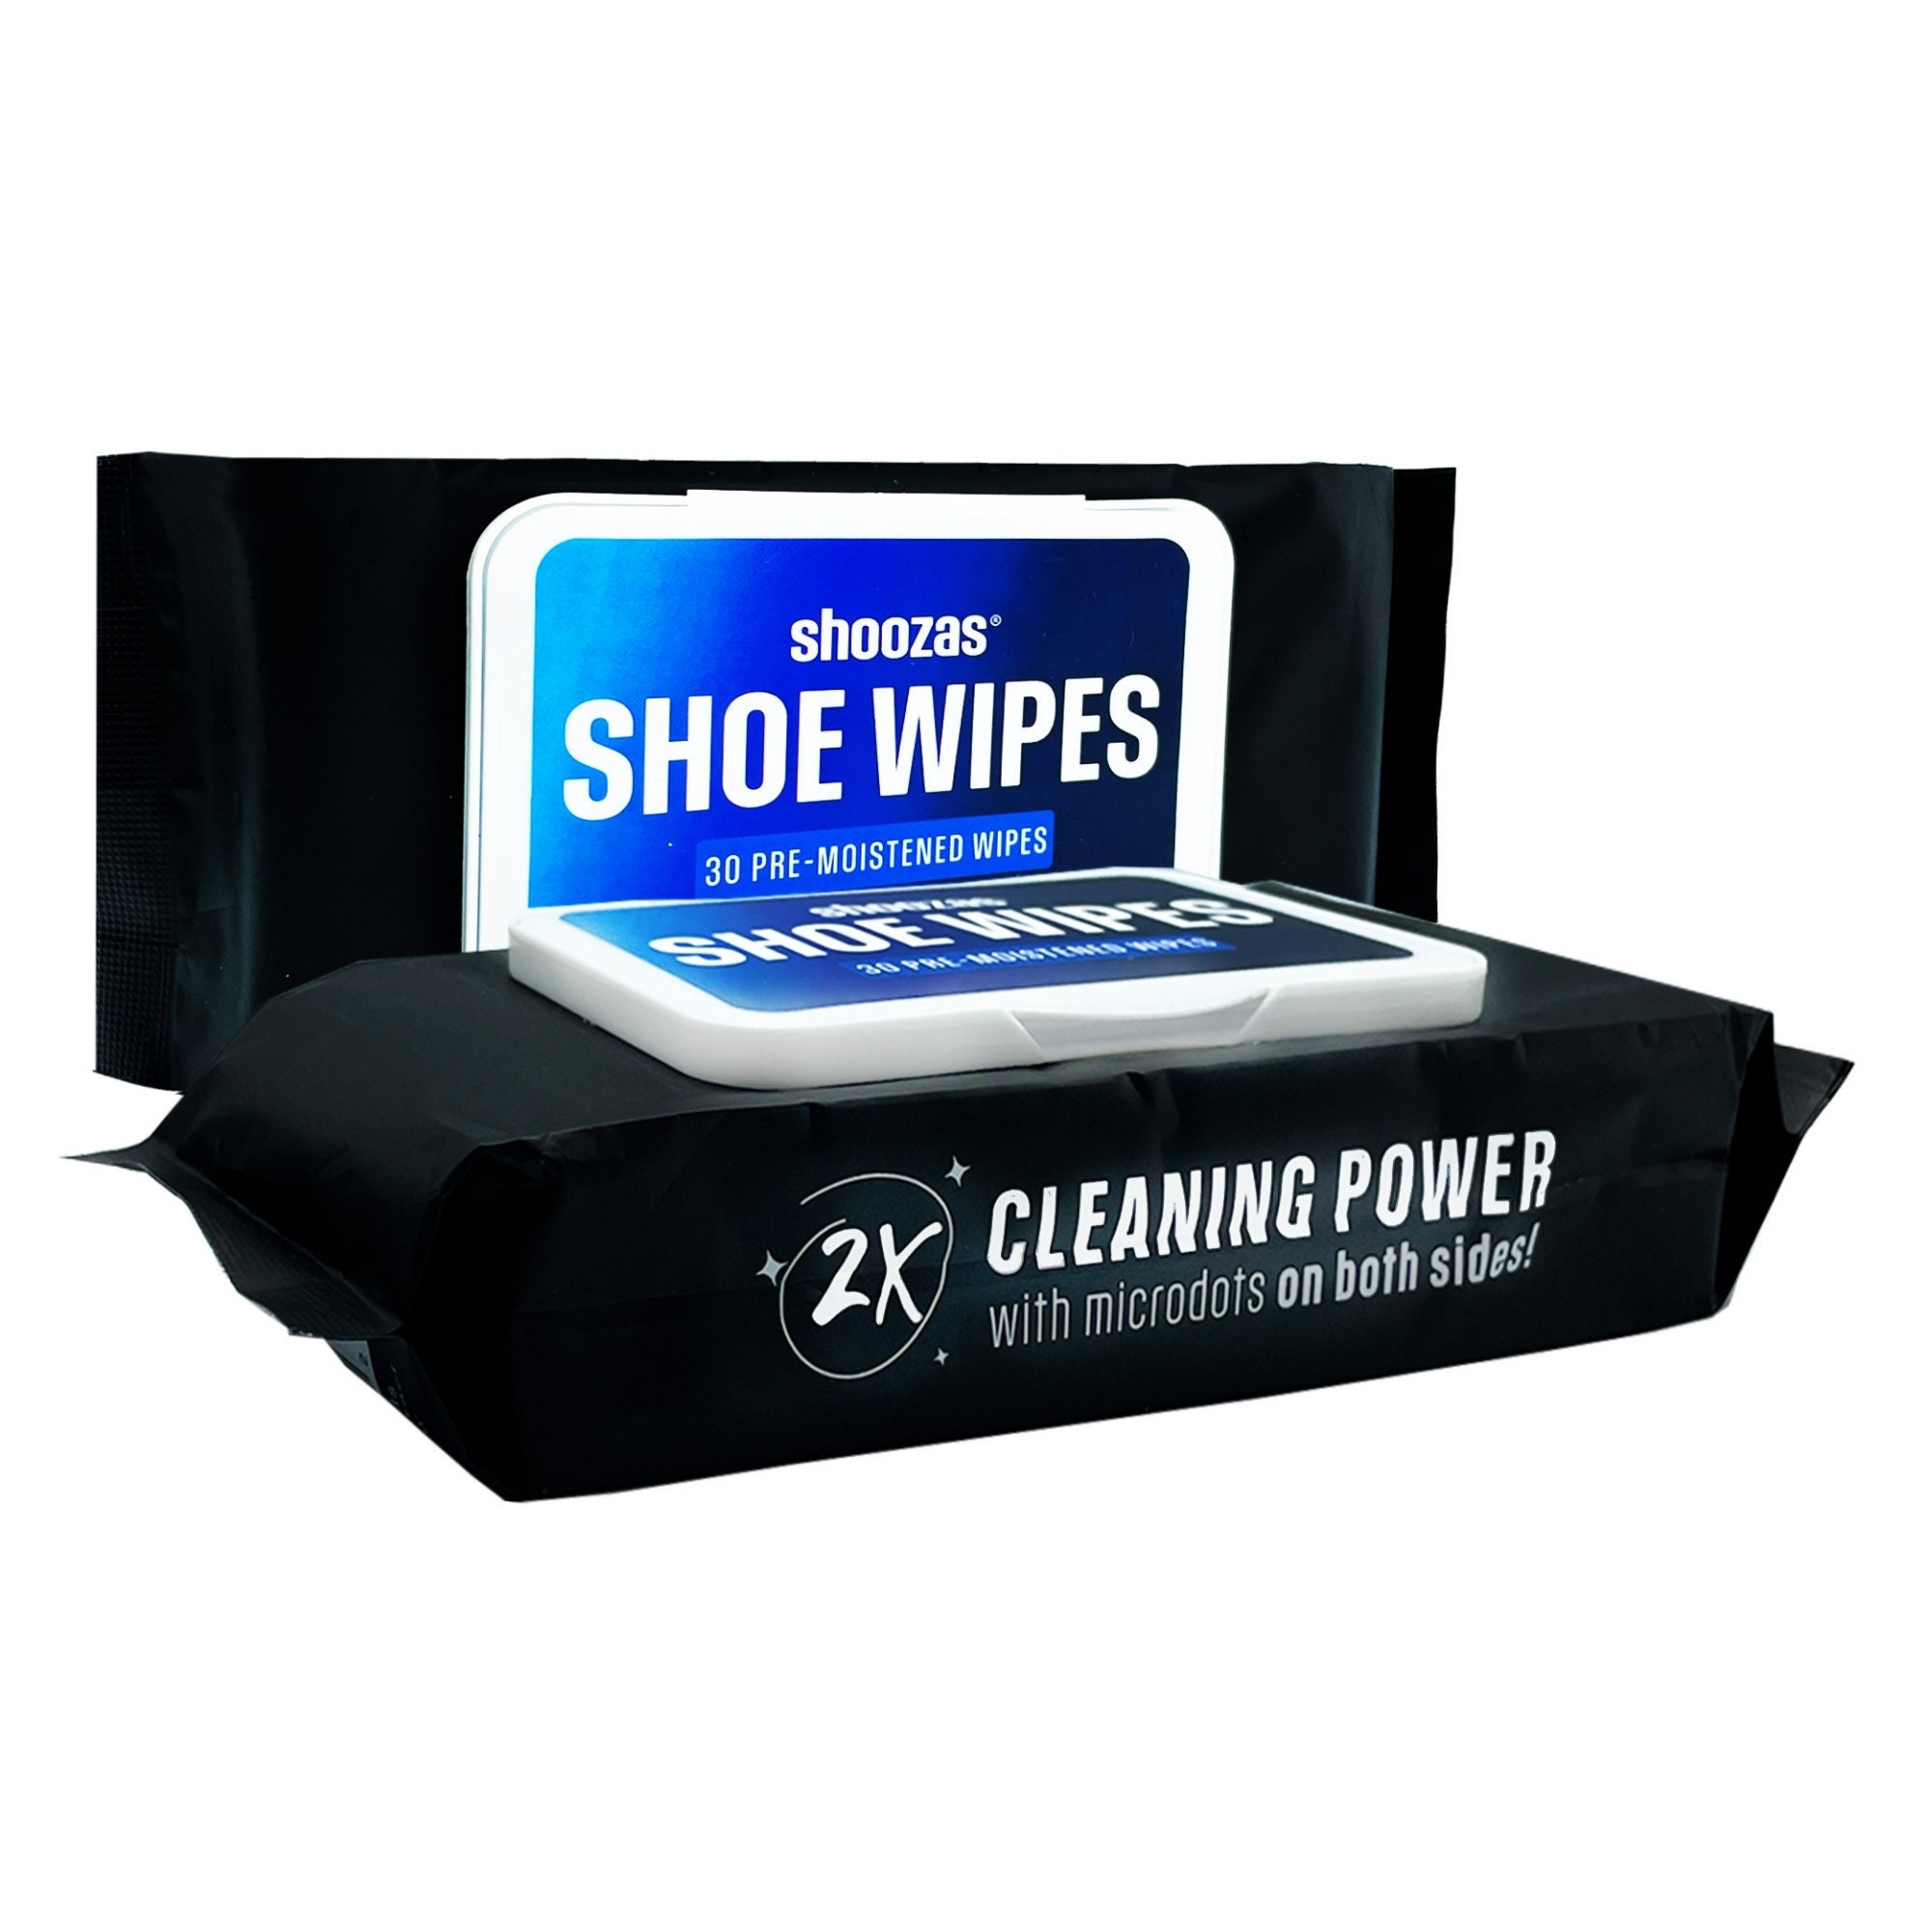 Shoozas Signature Shoe Cleaner Kit No Water Needed, Quick Dry, Non-toxic,  Best for Leather, Plastic, Rubber, Soles, Includes Cleaning Mat 